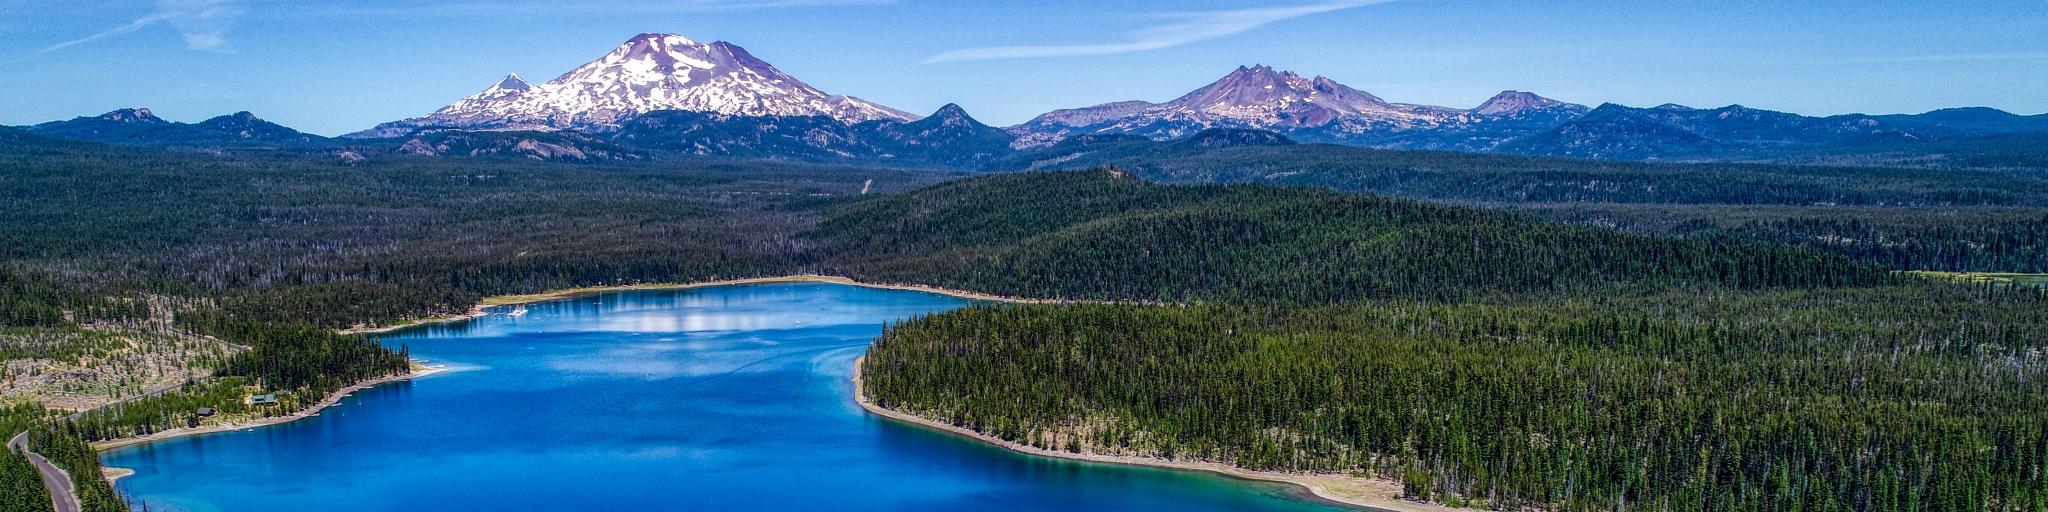 Aerial panorama of Elk Lake near Bend, Oregon, with the deep blue and turquoise lake sitting in front of snow capped mountains, under a blue sky